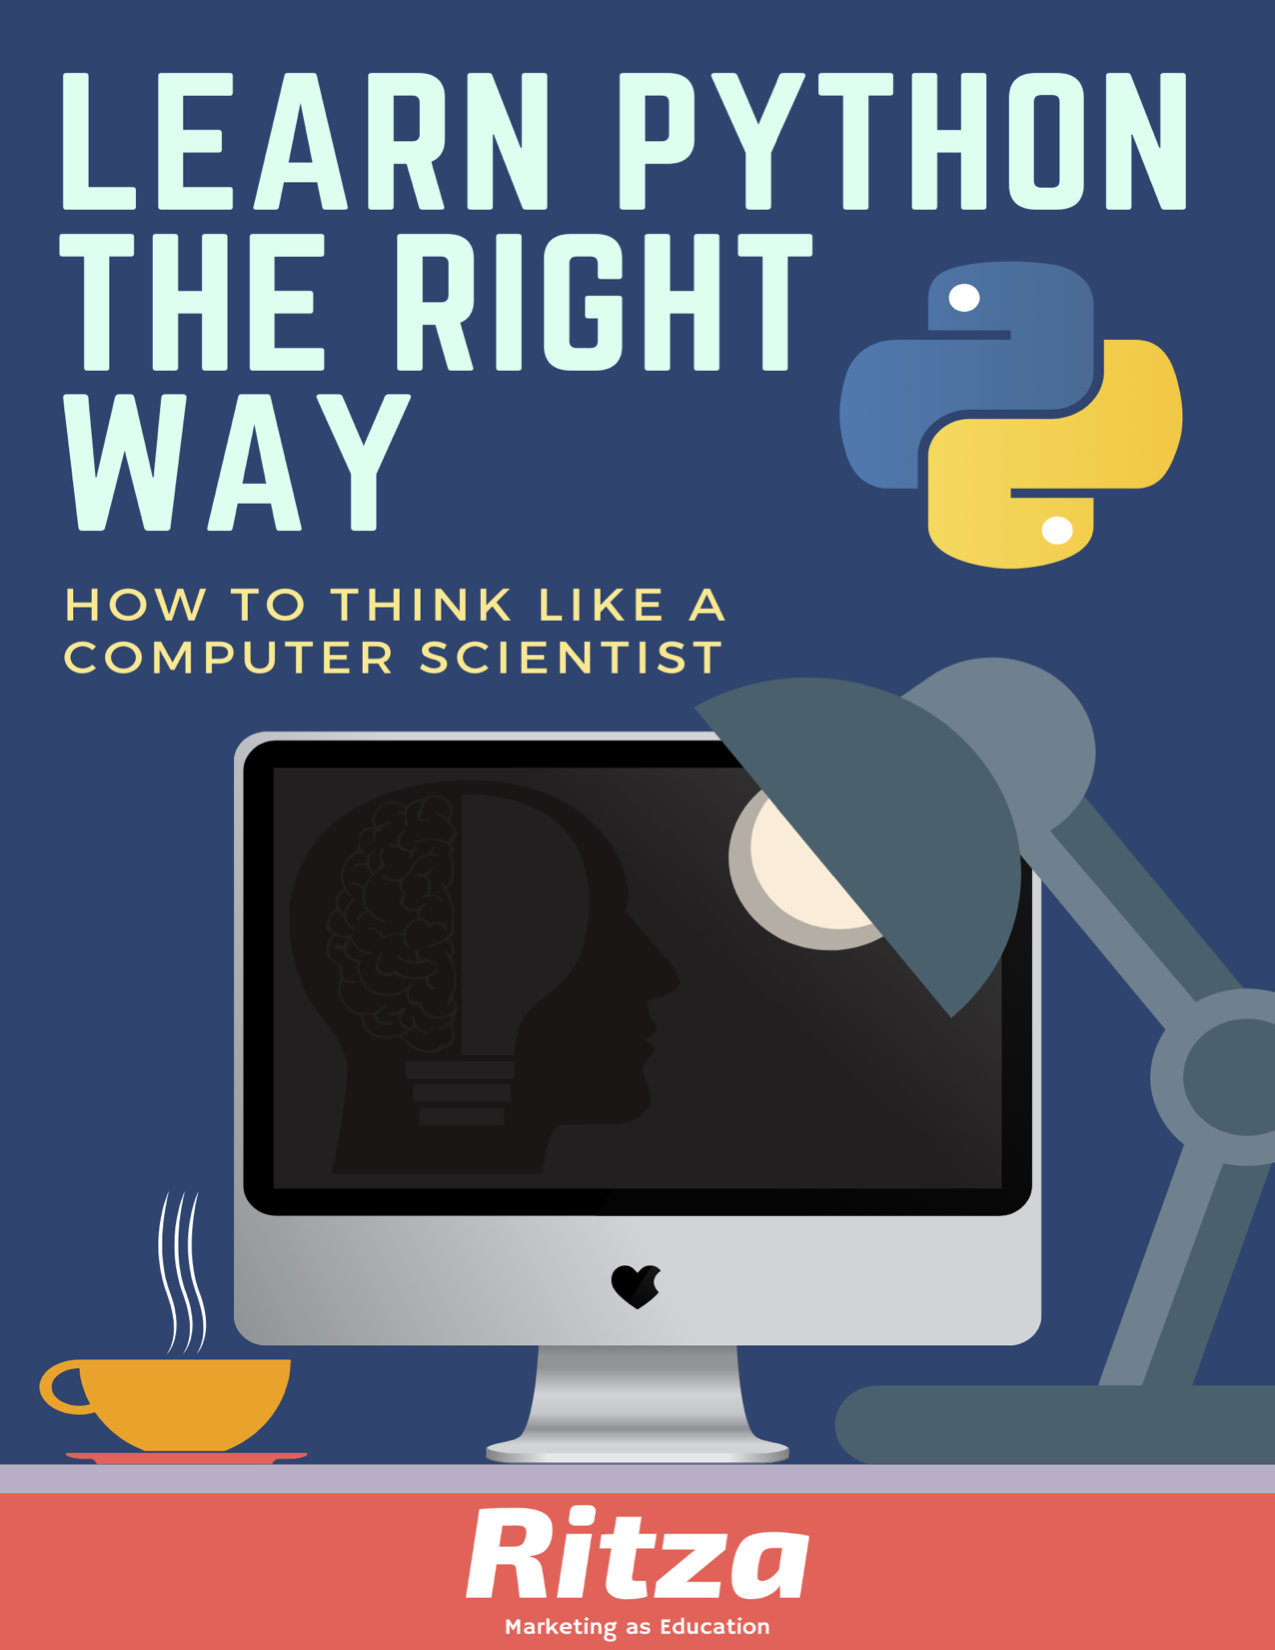 learnpythontherightway.com image